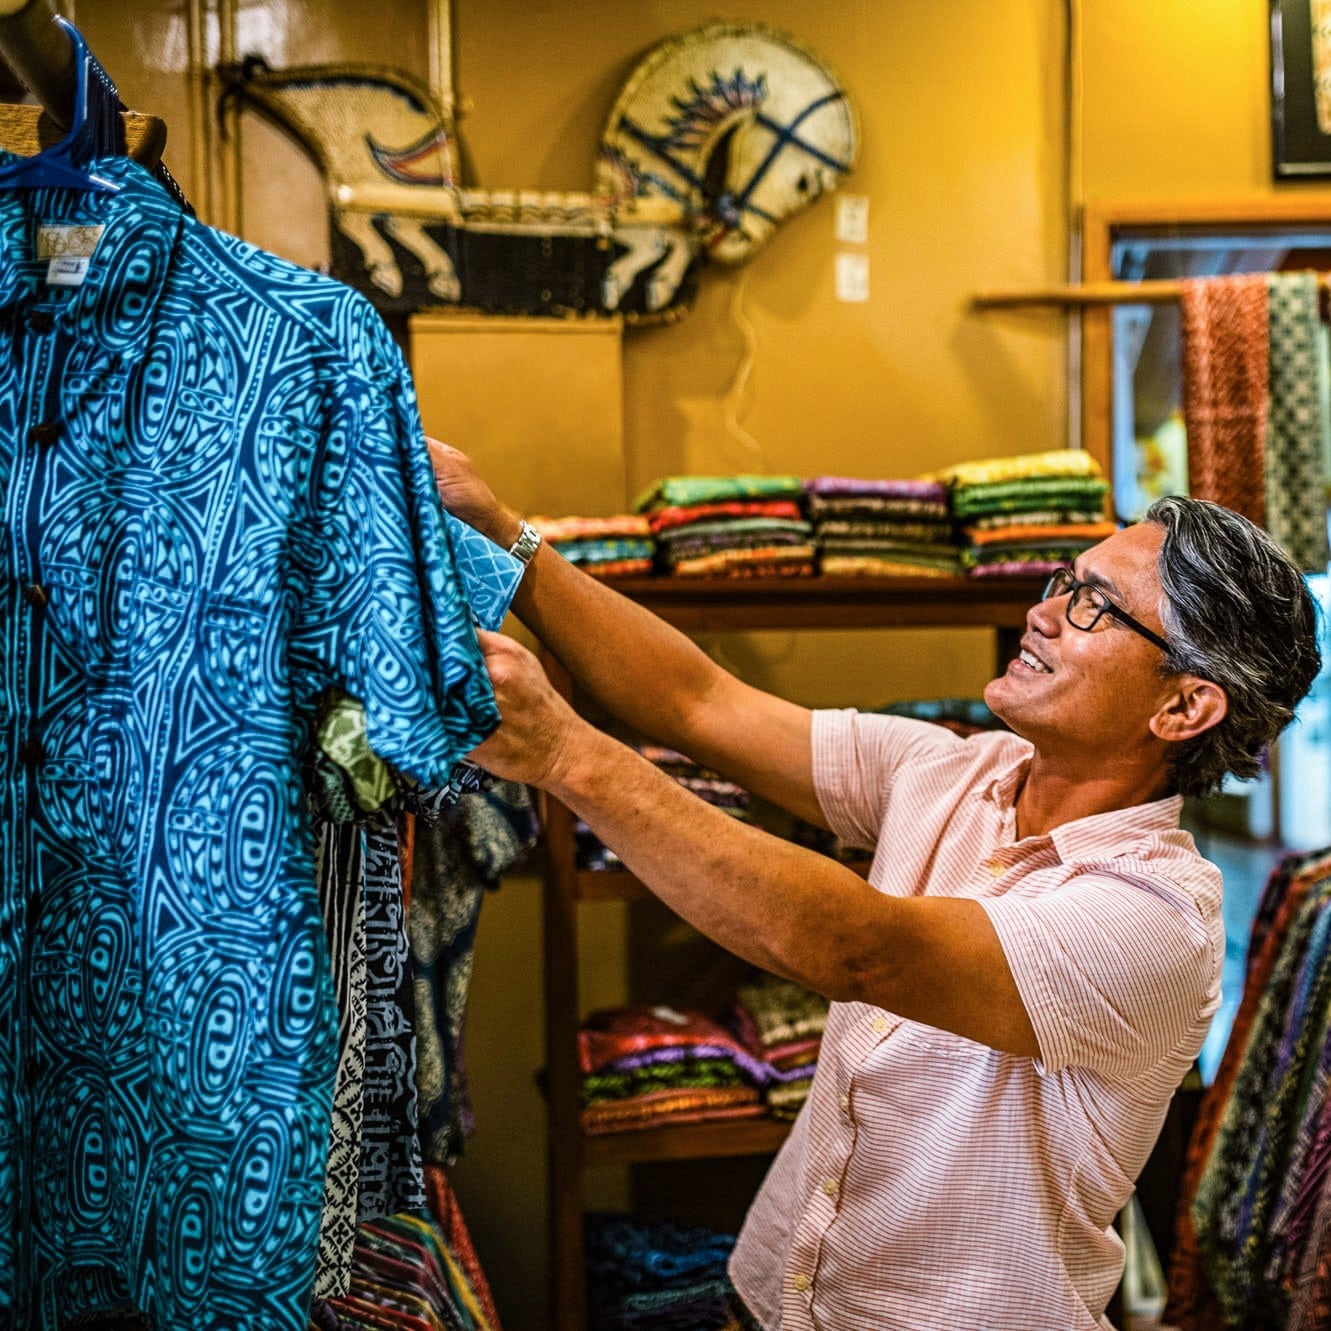 A vibrant, pedestrian-friendly Honolulu neighborhood, Ward Village offers new and growing kamaʻāina-owned and operated businesses an opportunity to thrive. Read the full feature published by Pacific Business News in our link in bio.